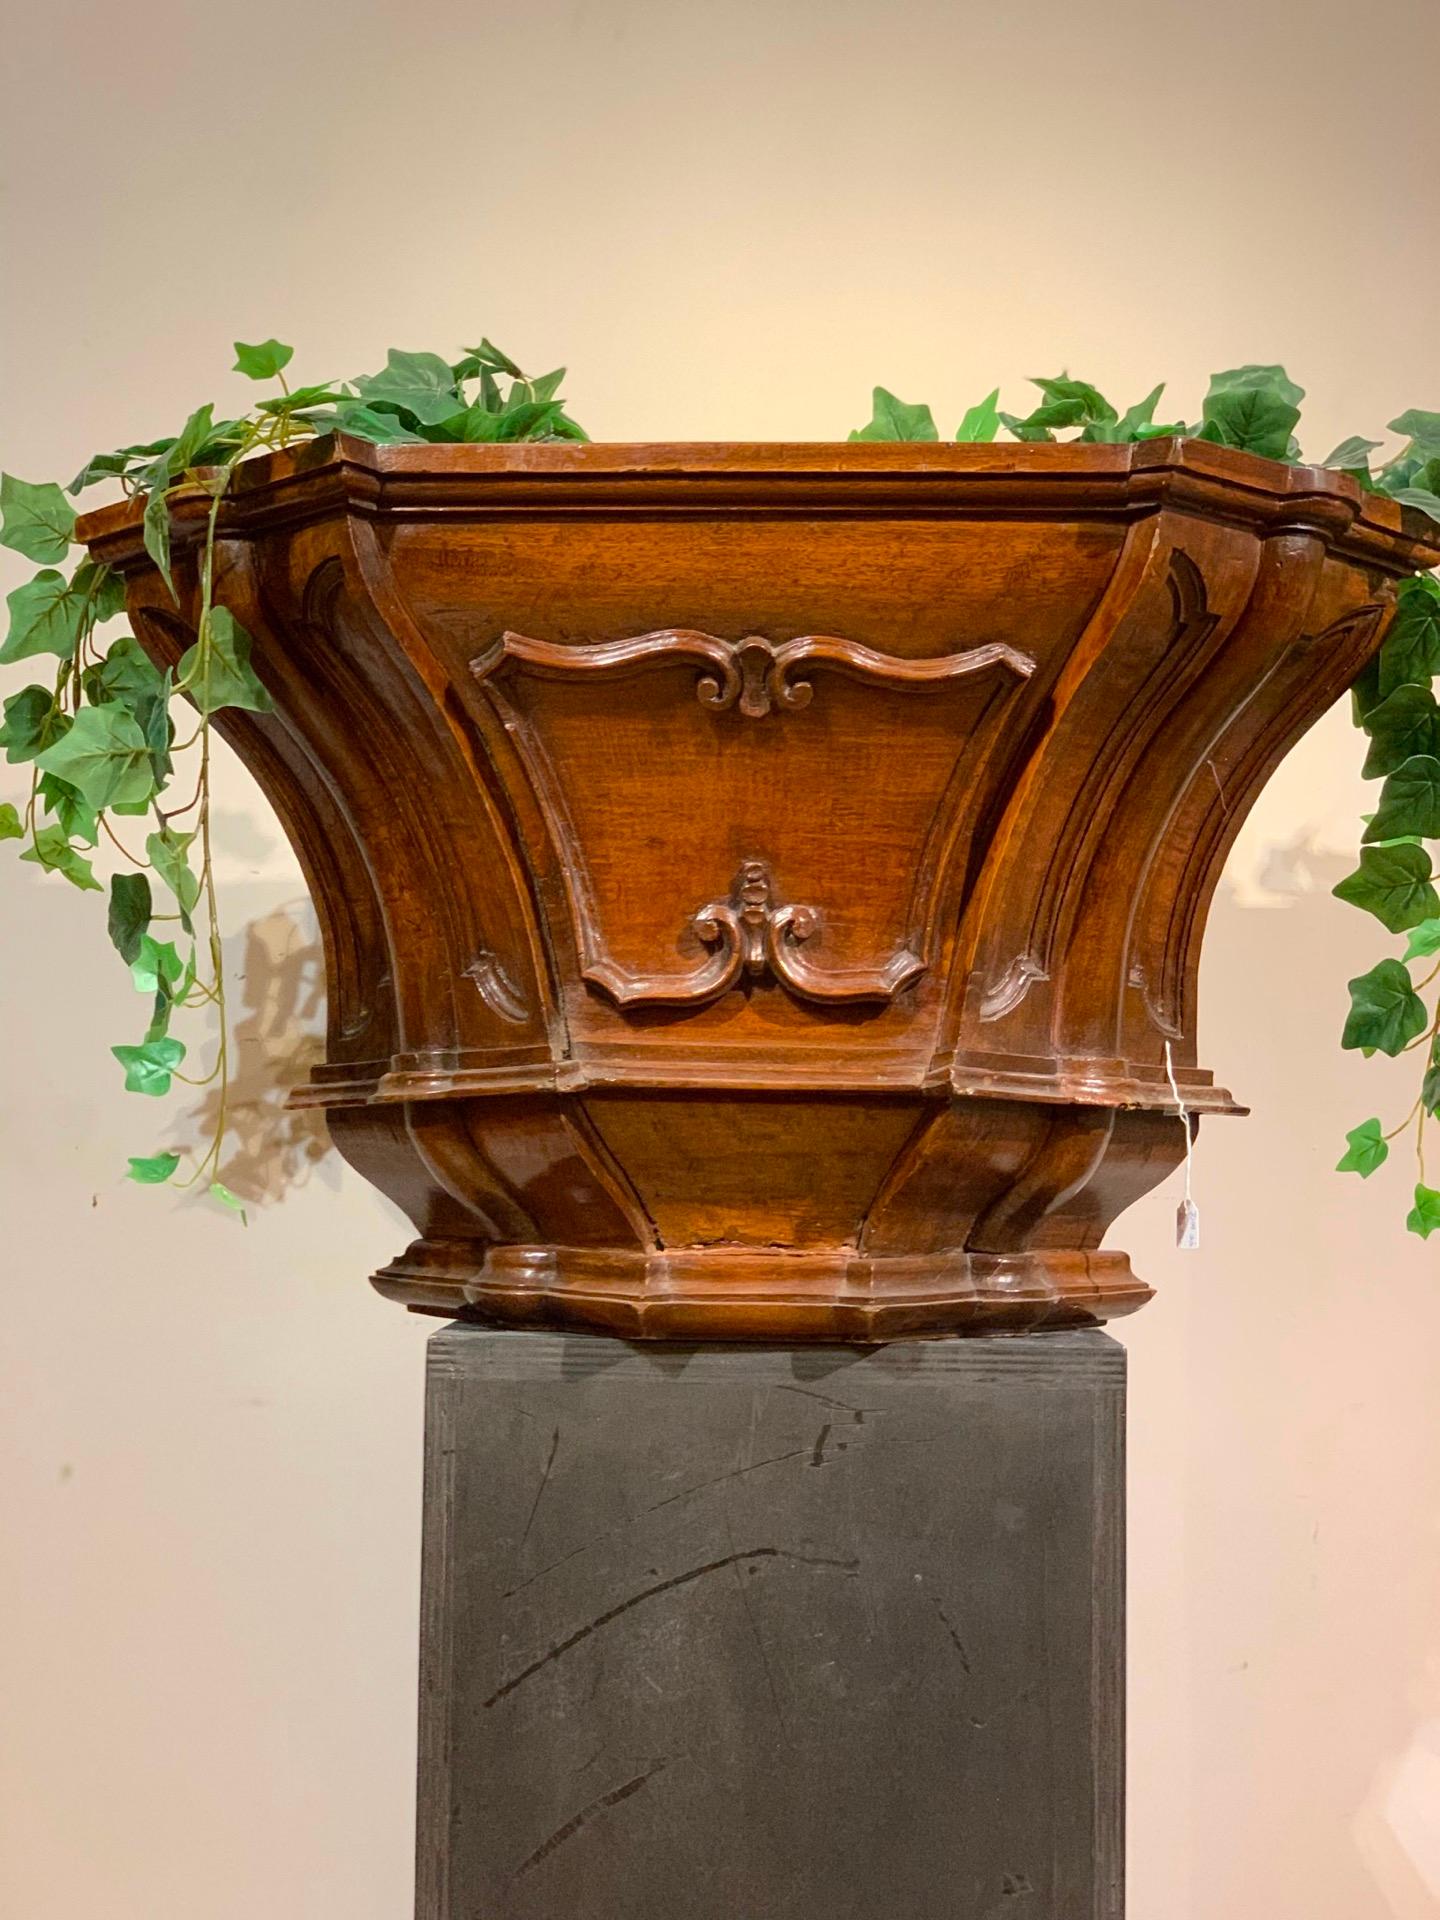 Rare wall planter in solid walnut carved with spirals and curls. Very convenient for keeping plants or flowers hanging from the wall, the inside is lined with tinplate with handles for pulling it out.
Venetian manufacture, Louis XV period.